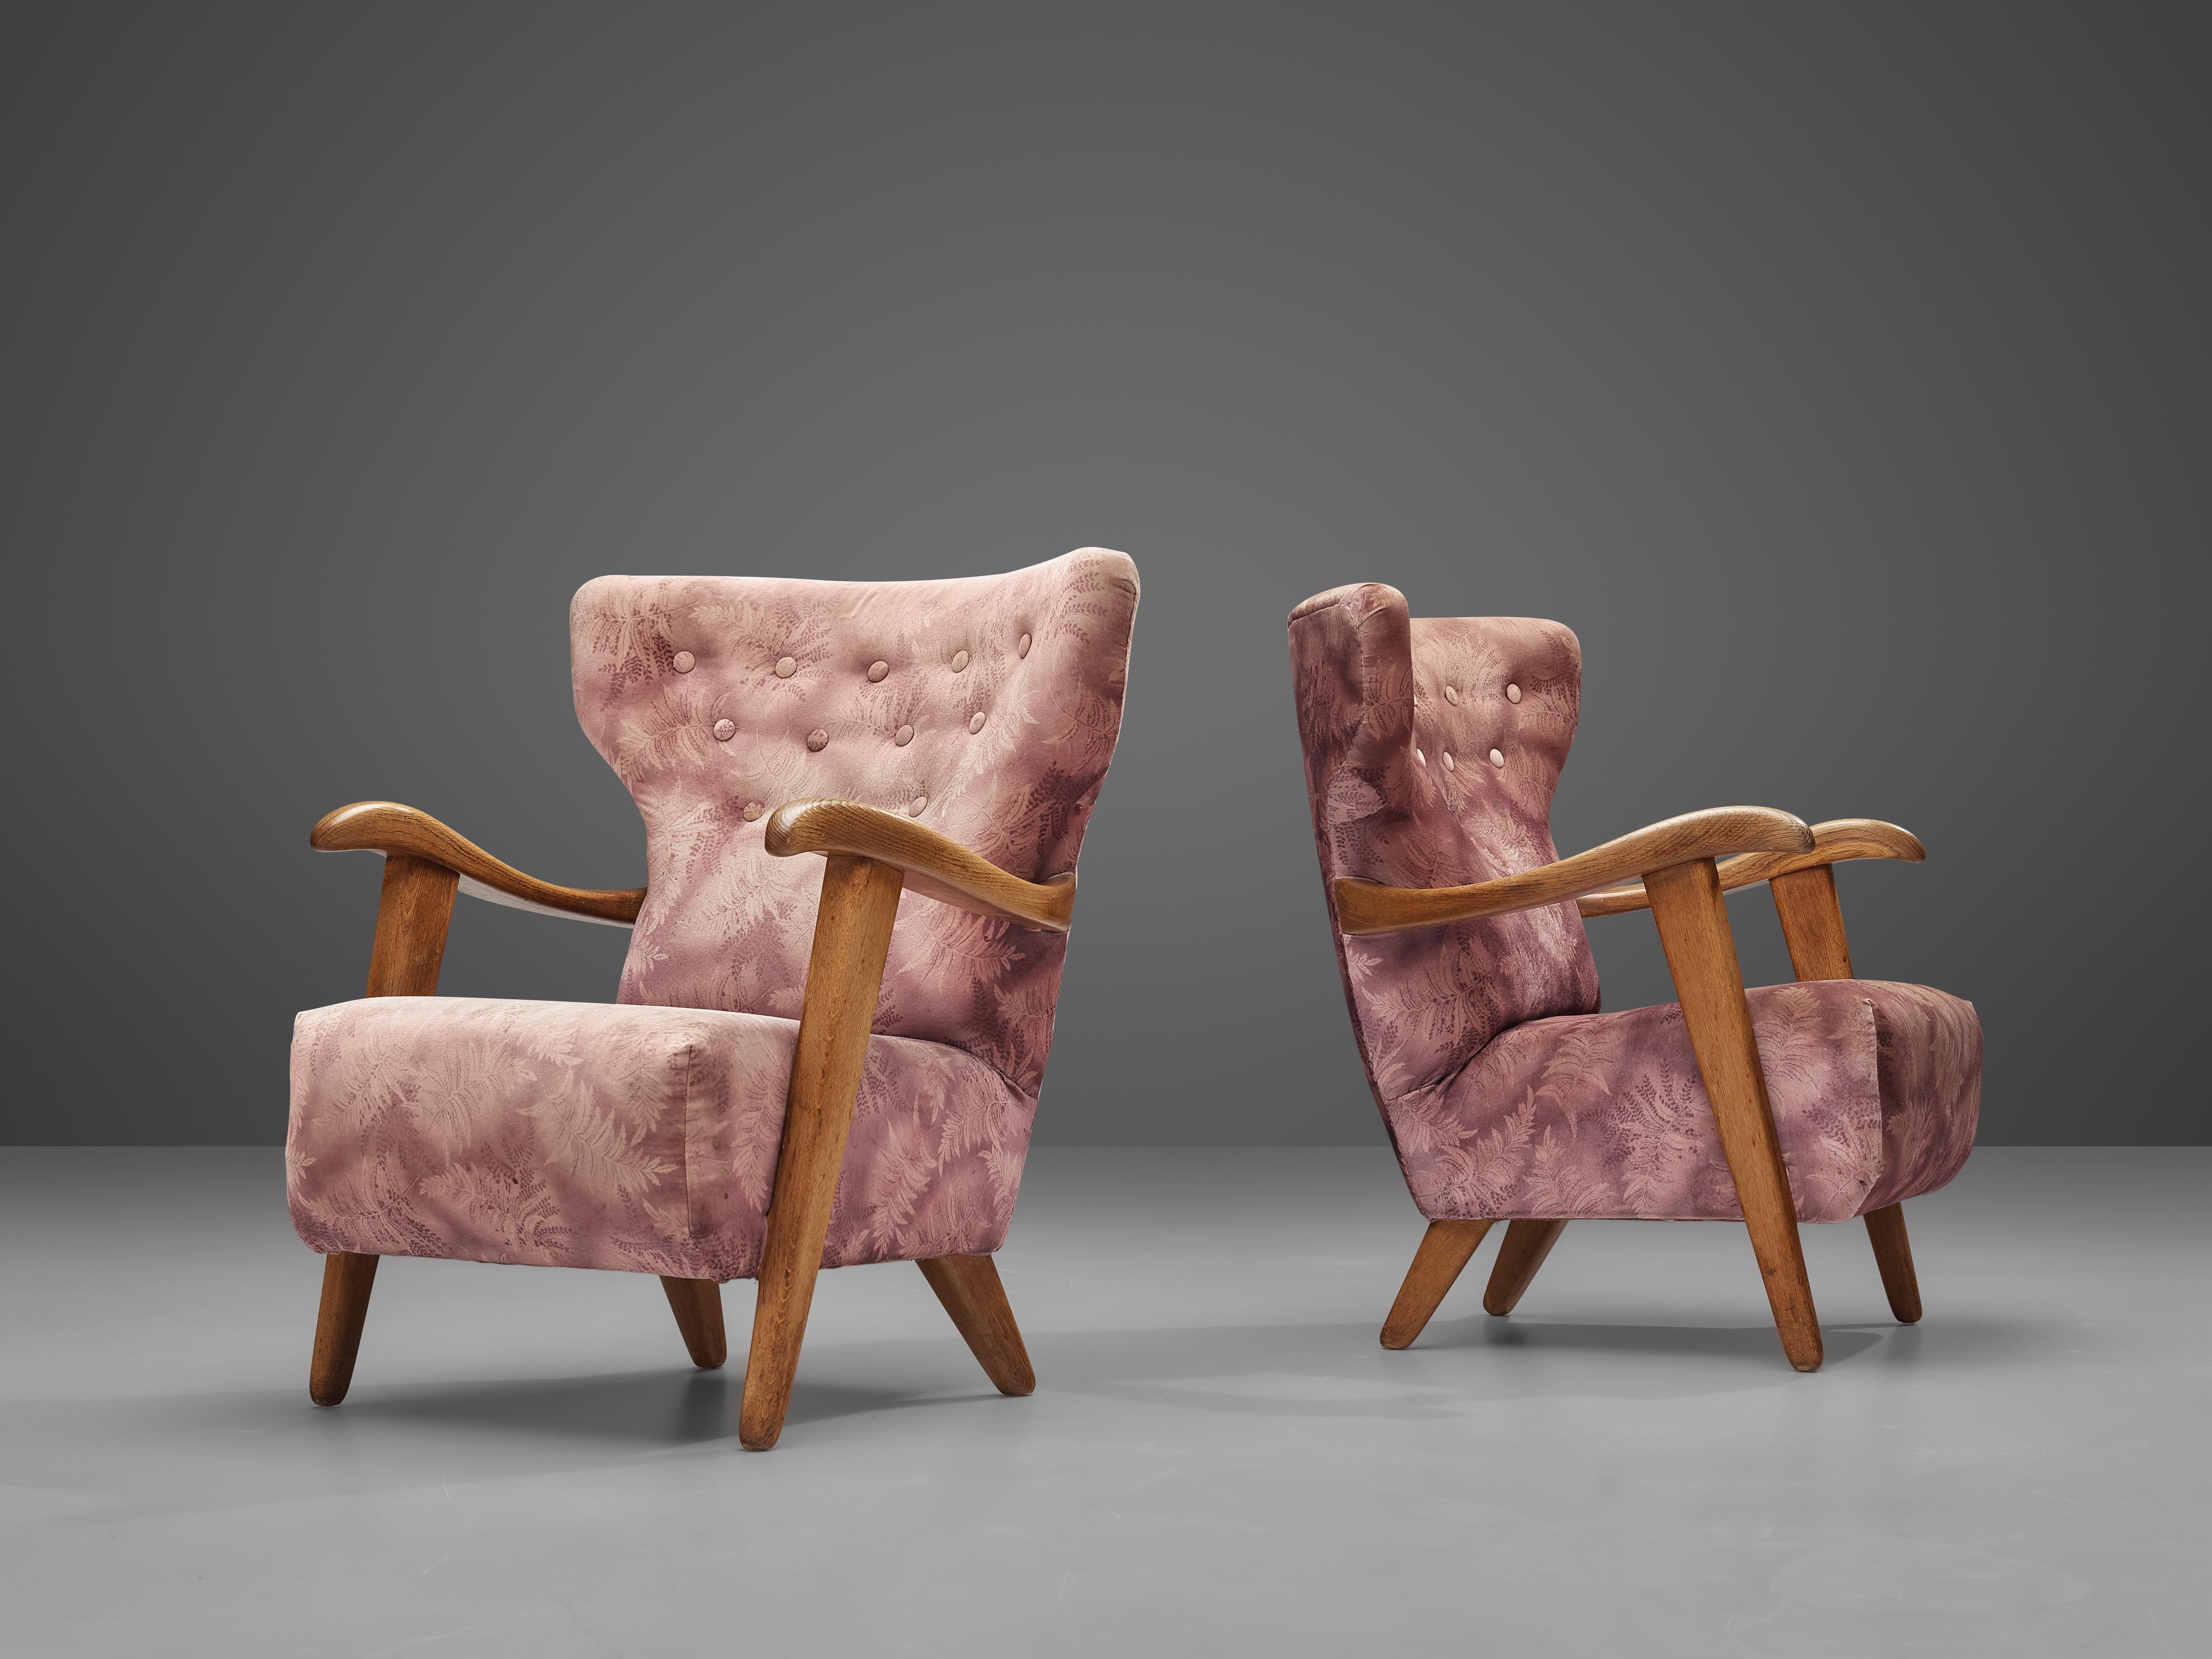 Lounge chairs, oak, fabric, France, 1960s

This wonderful pair of French lounge chairs features a backrest with winglike upper ends. Tufted details structure the high backrest. More dynamic appeal is created by the curved armrests in oak. 

Please